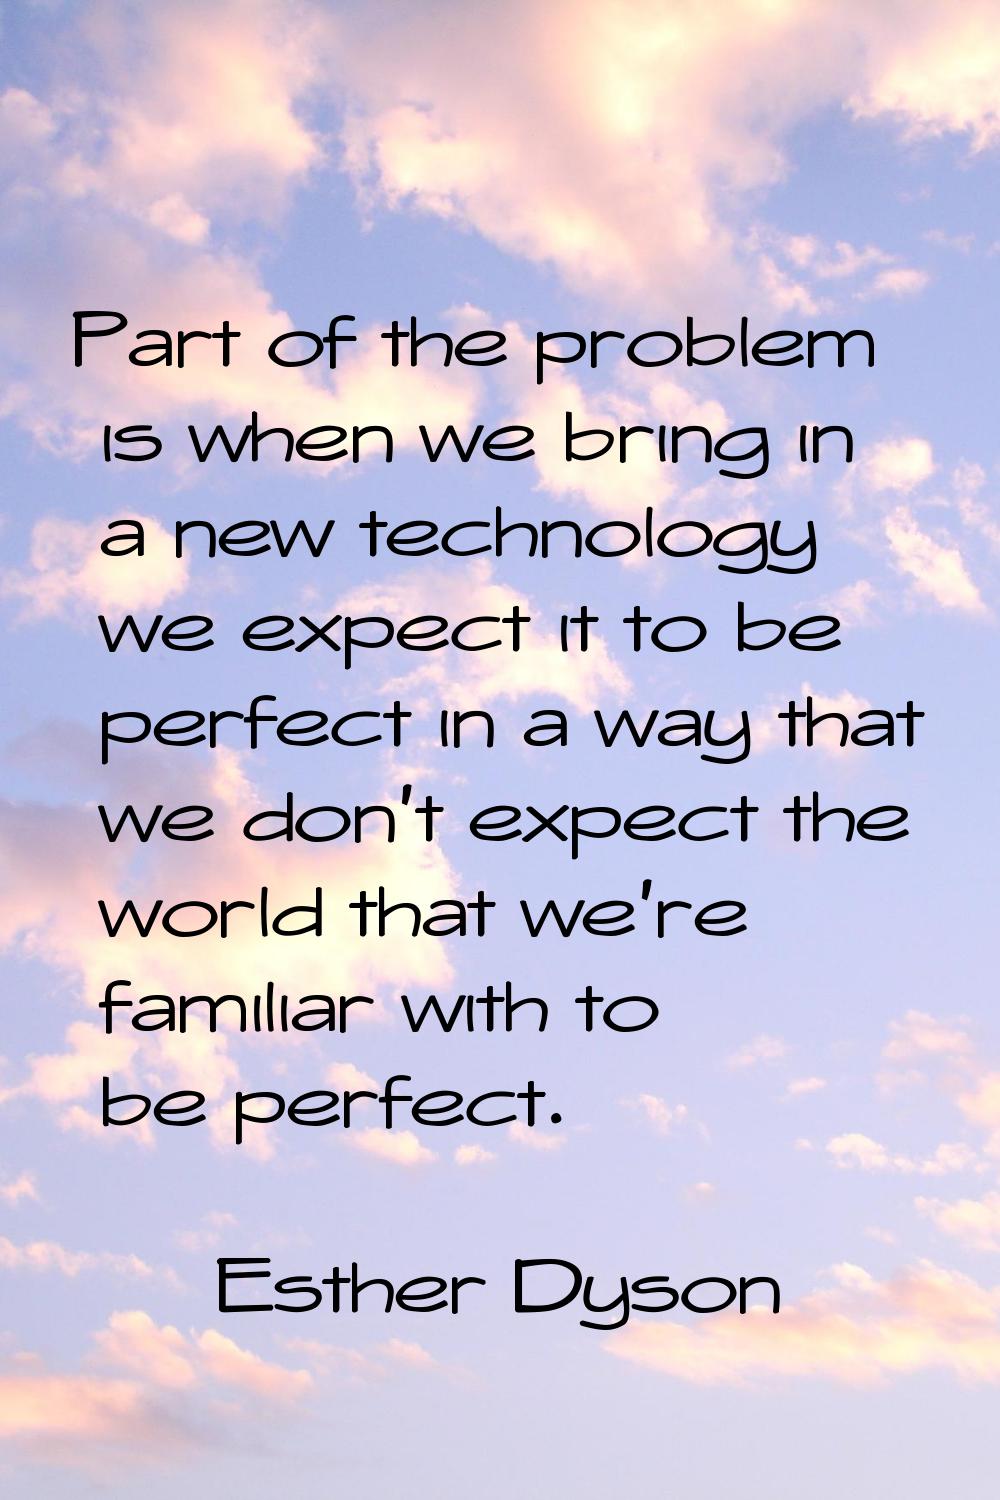 Part of the problem is when we bring in a new technology we expect it to be perfect in a way that w